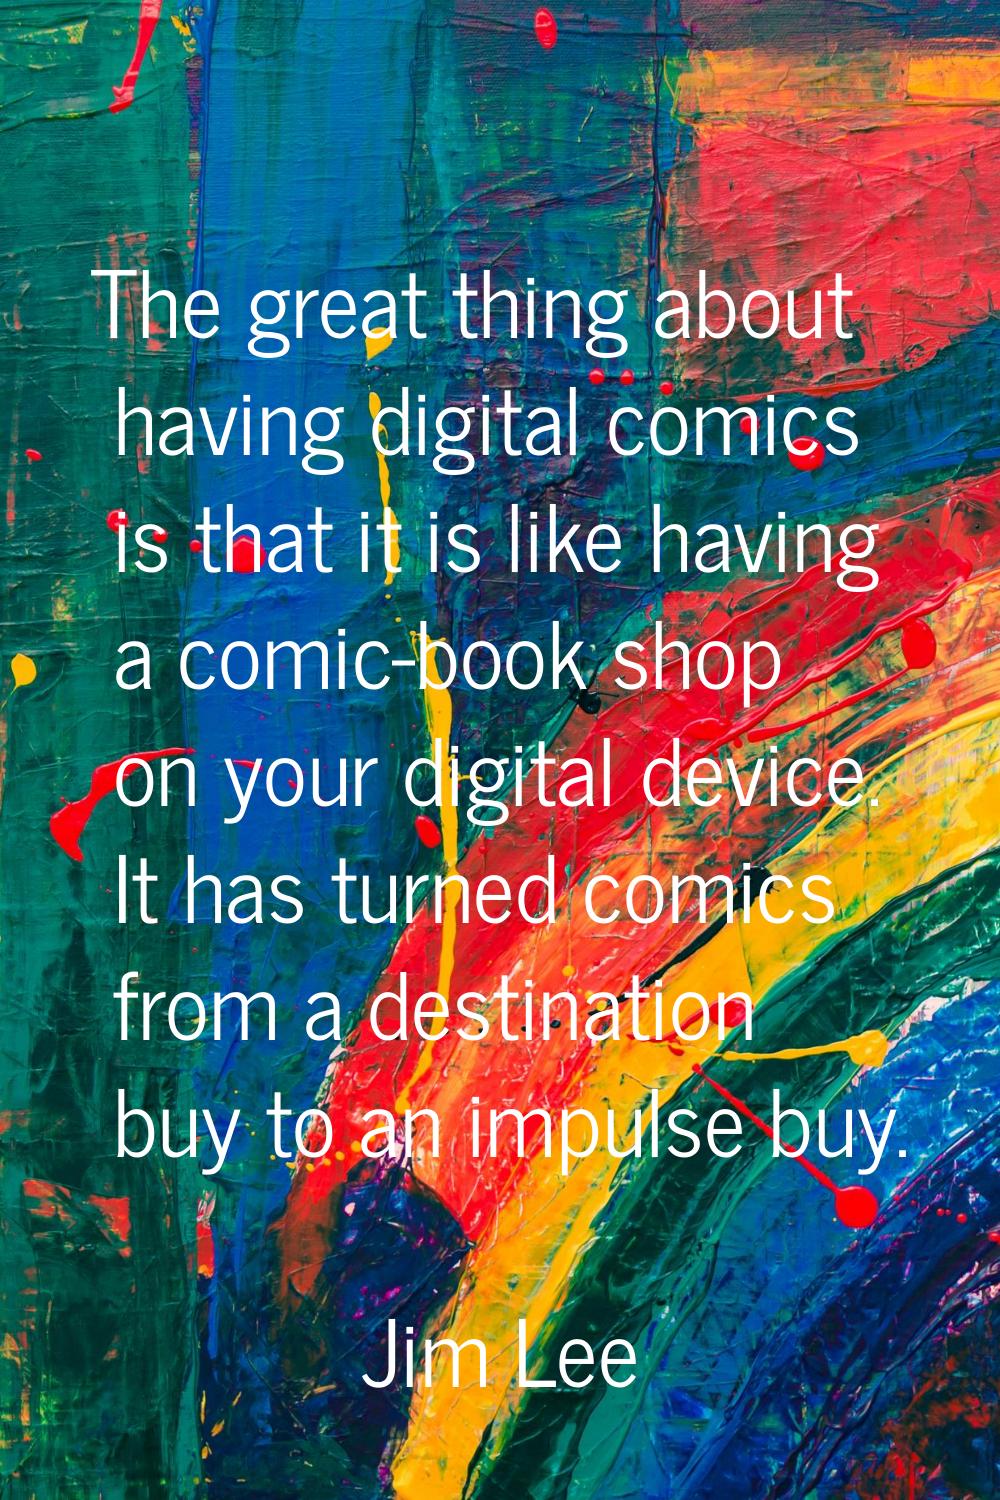 The great thing about having digital comics is that it is like having a comic-book shop on your dig